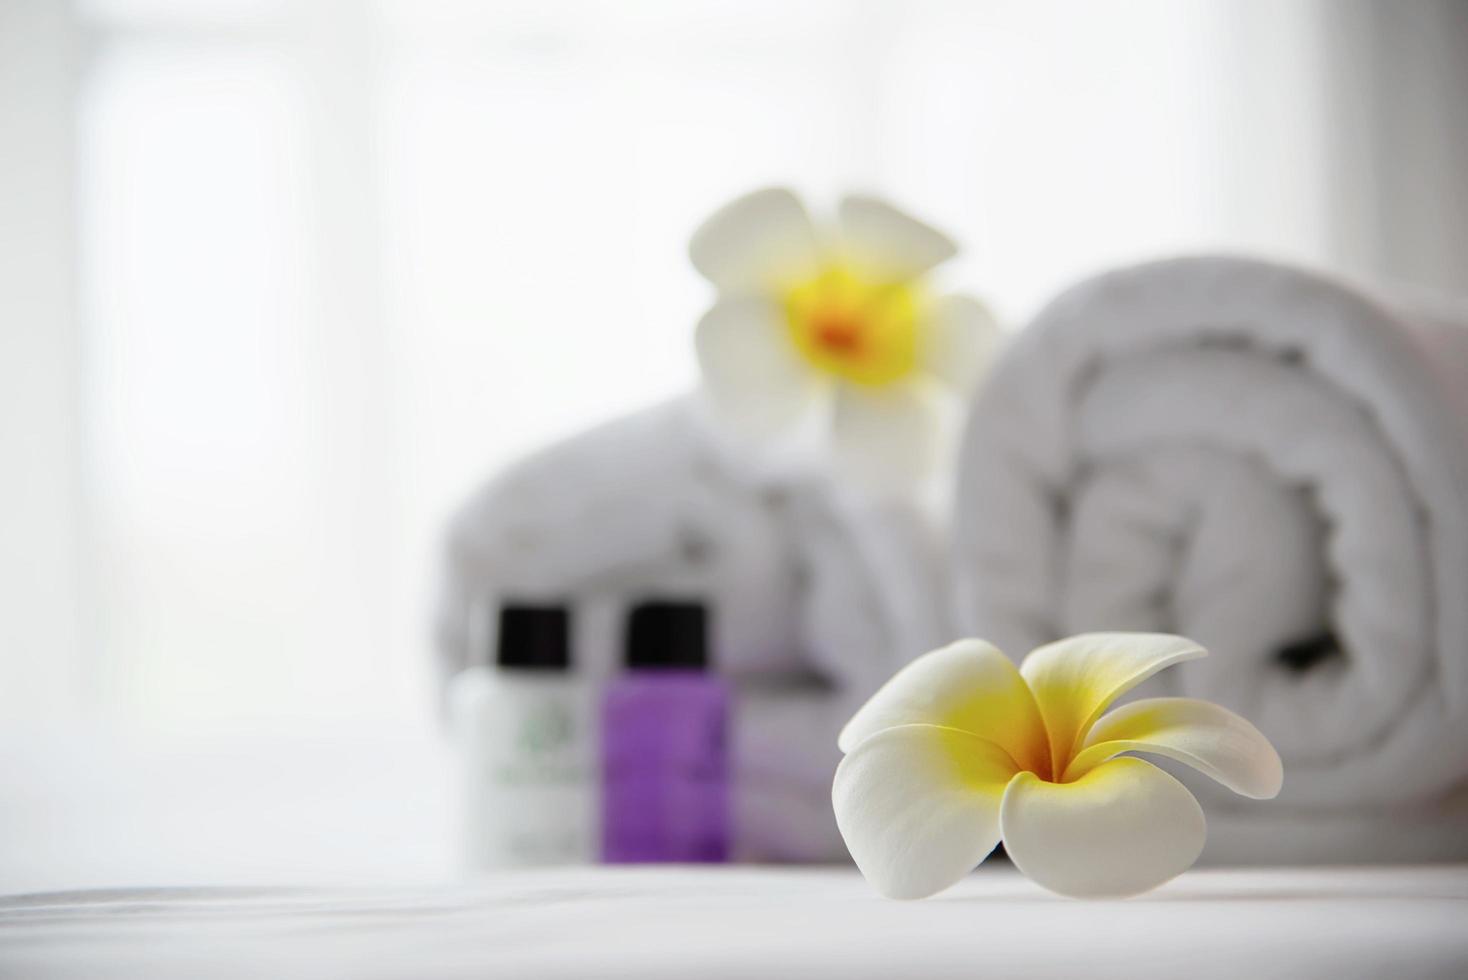 Hotel towel and shampoo and soap bath bottle set on white bed with plumeria flower decorated - relax vacation at the hotel resort concept photo